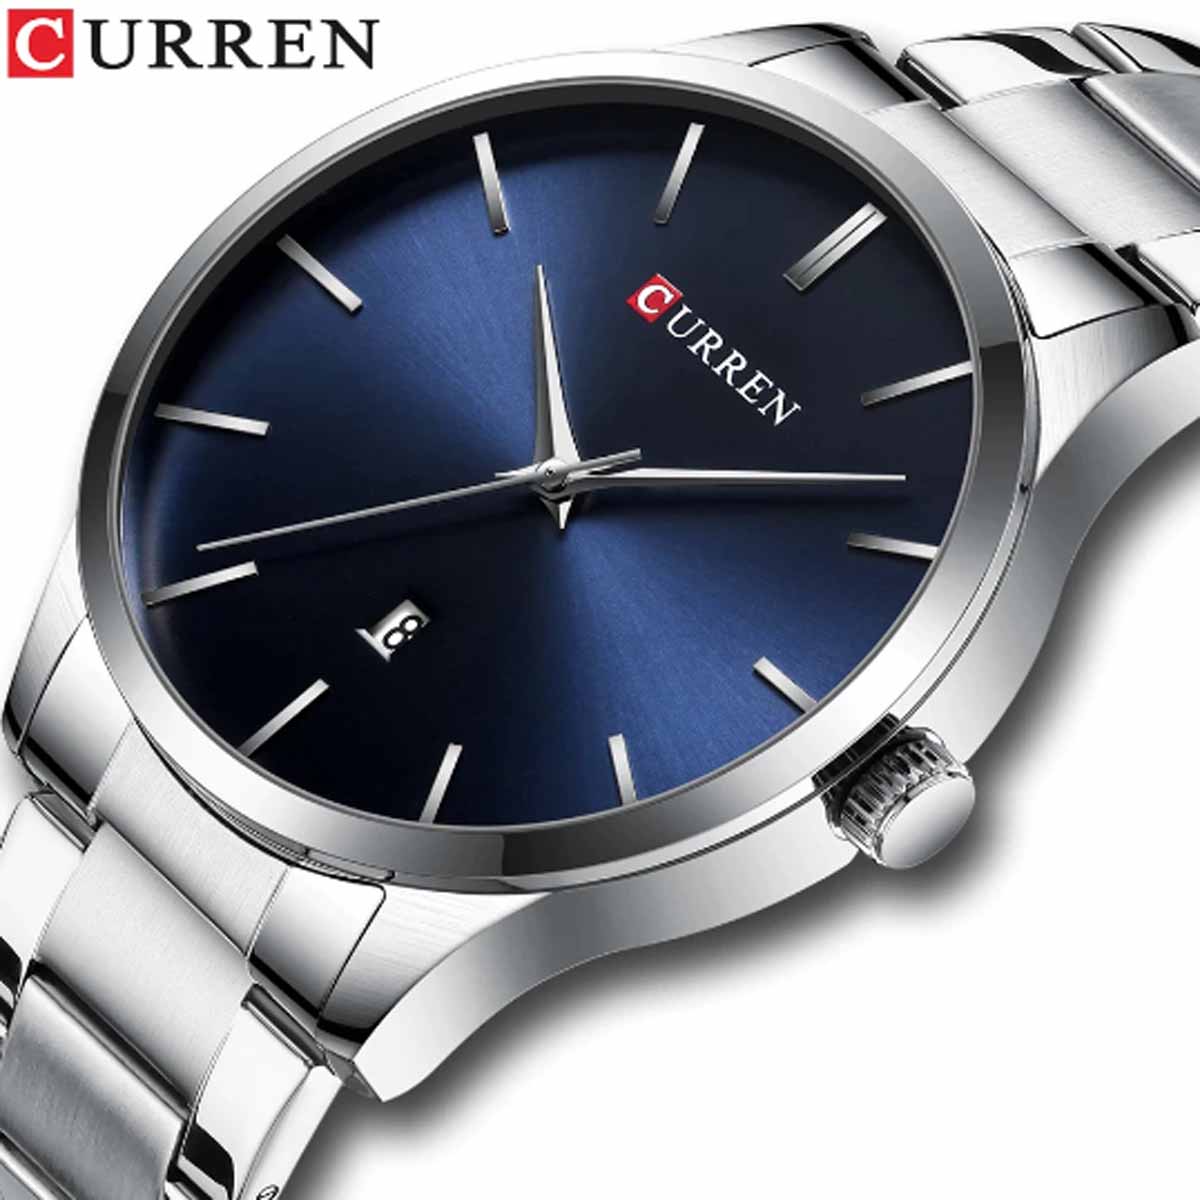 CURREN Original Brand Stainless Steel Band Wrist Watch For Men With Brand (Box & Bag)-8357